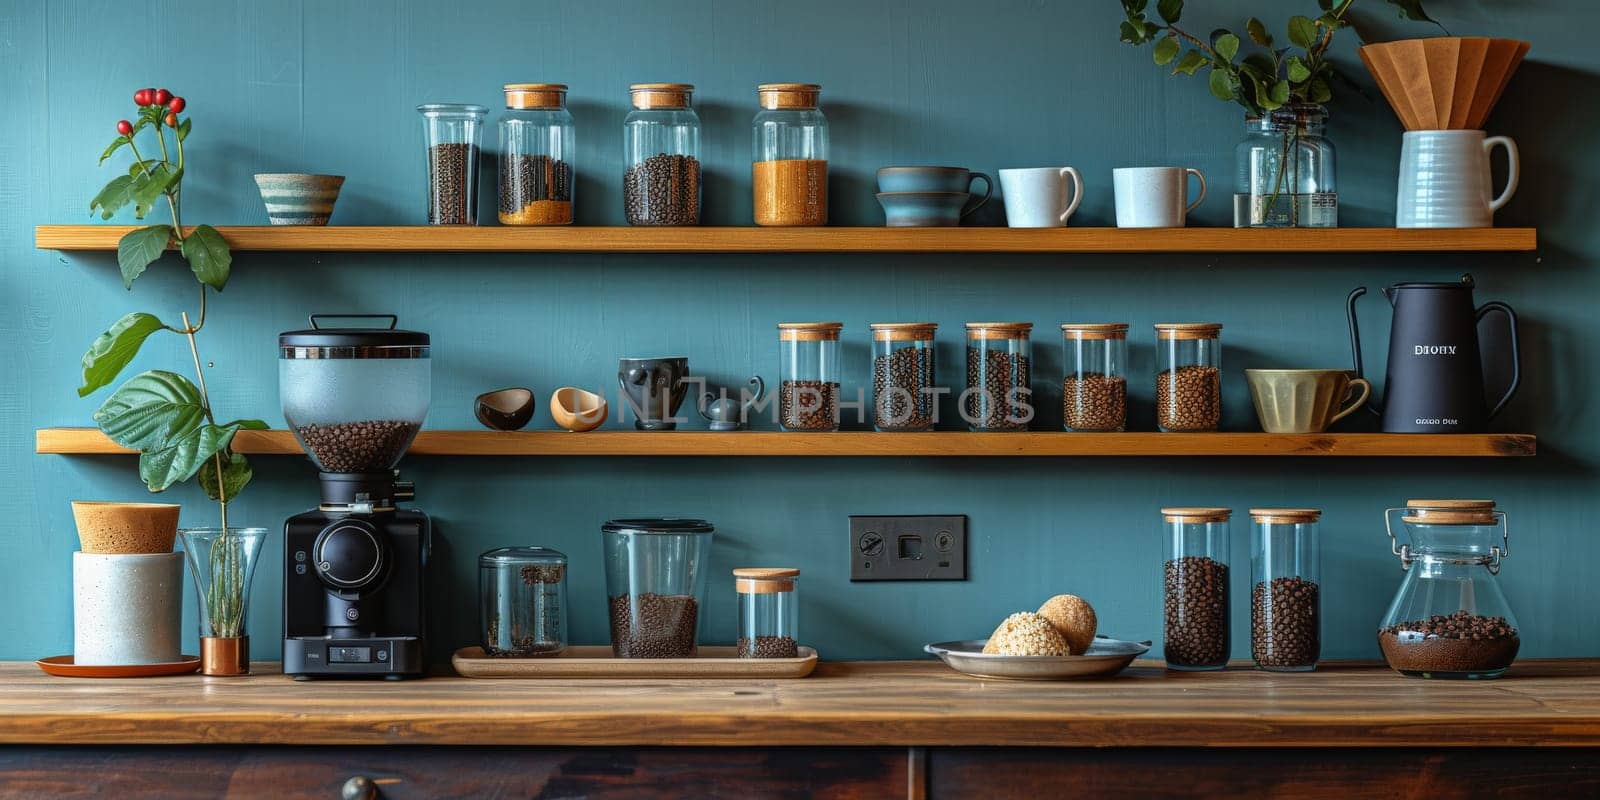 coffee still life (grinder, cup, a bag of beans, a jar against the background of an old wall